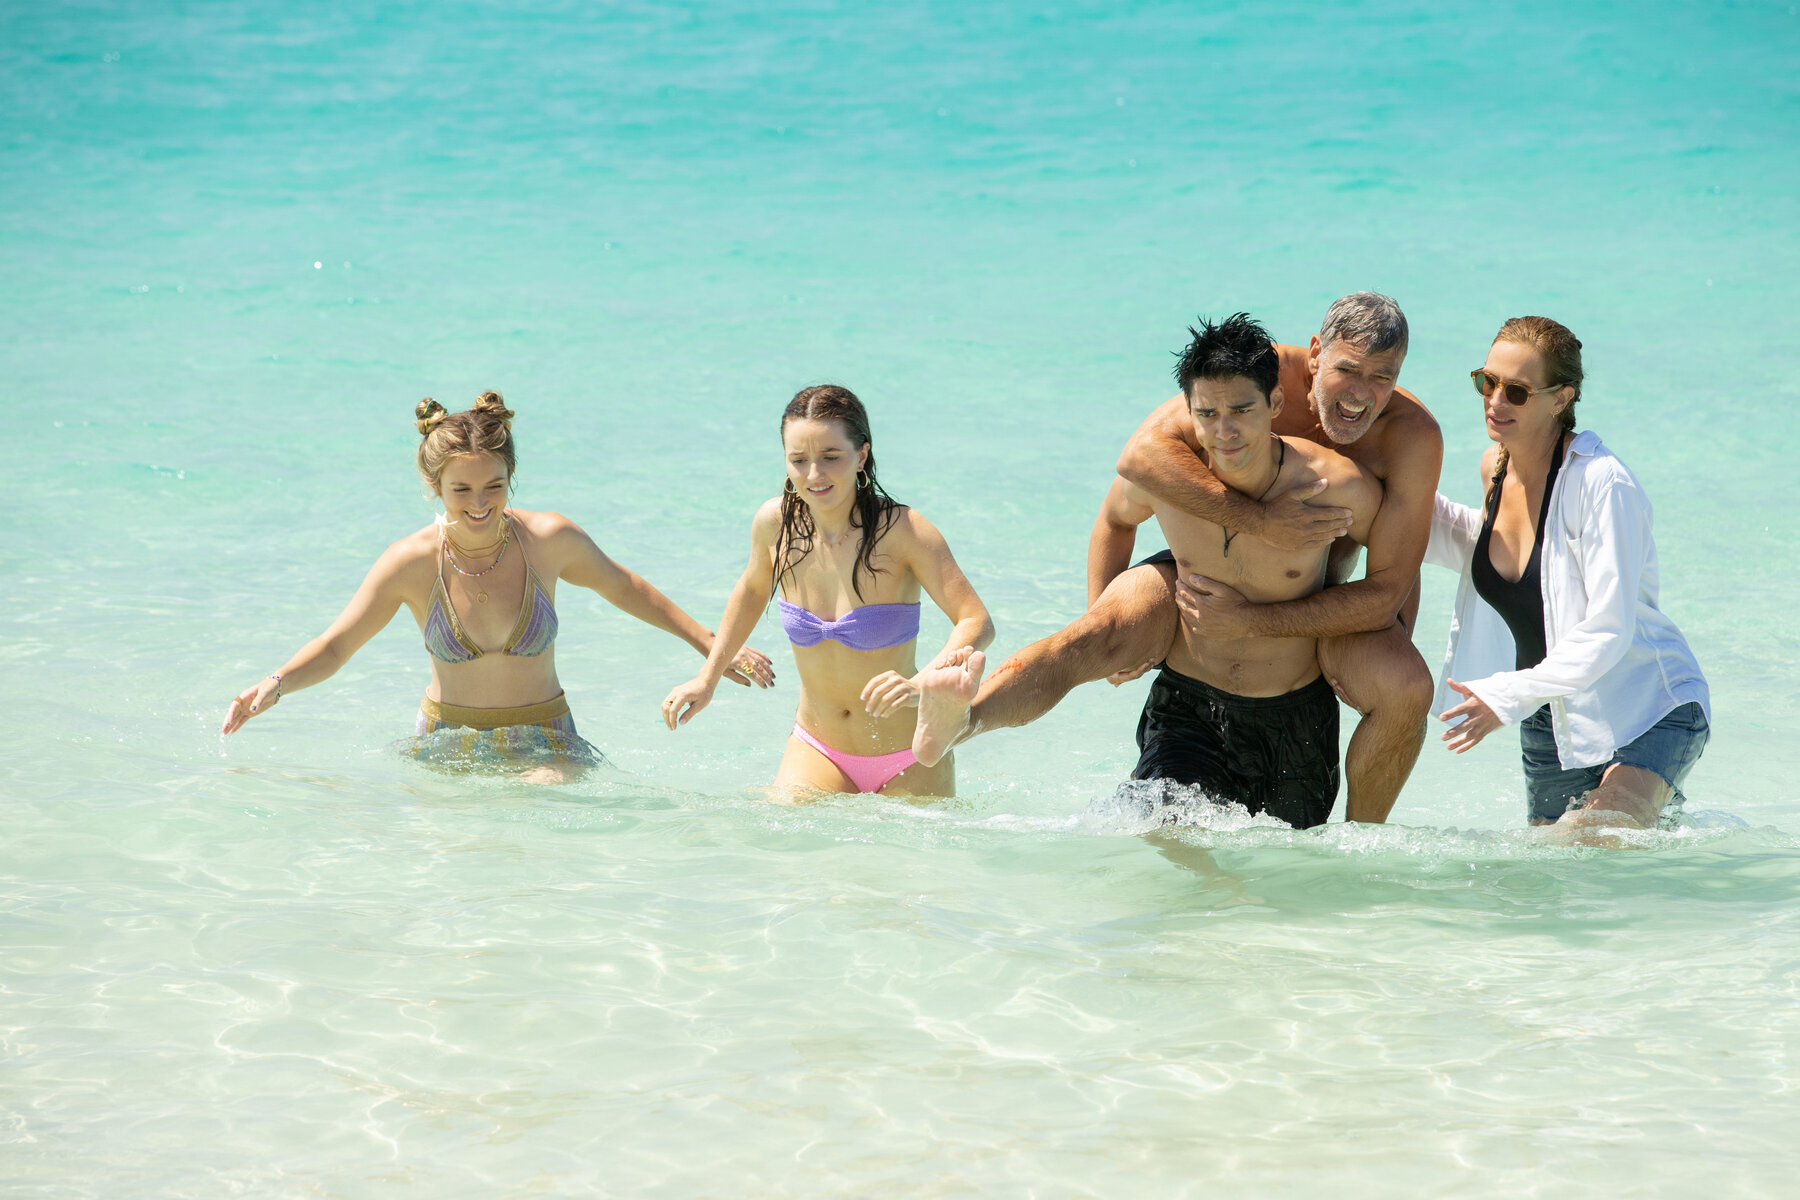 Maxime Bouttier carries George Clooney out of the ocean in Ticket to Paradise.